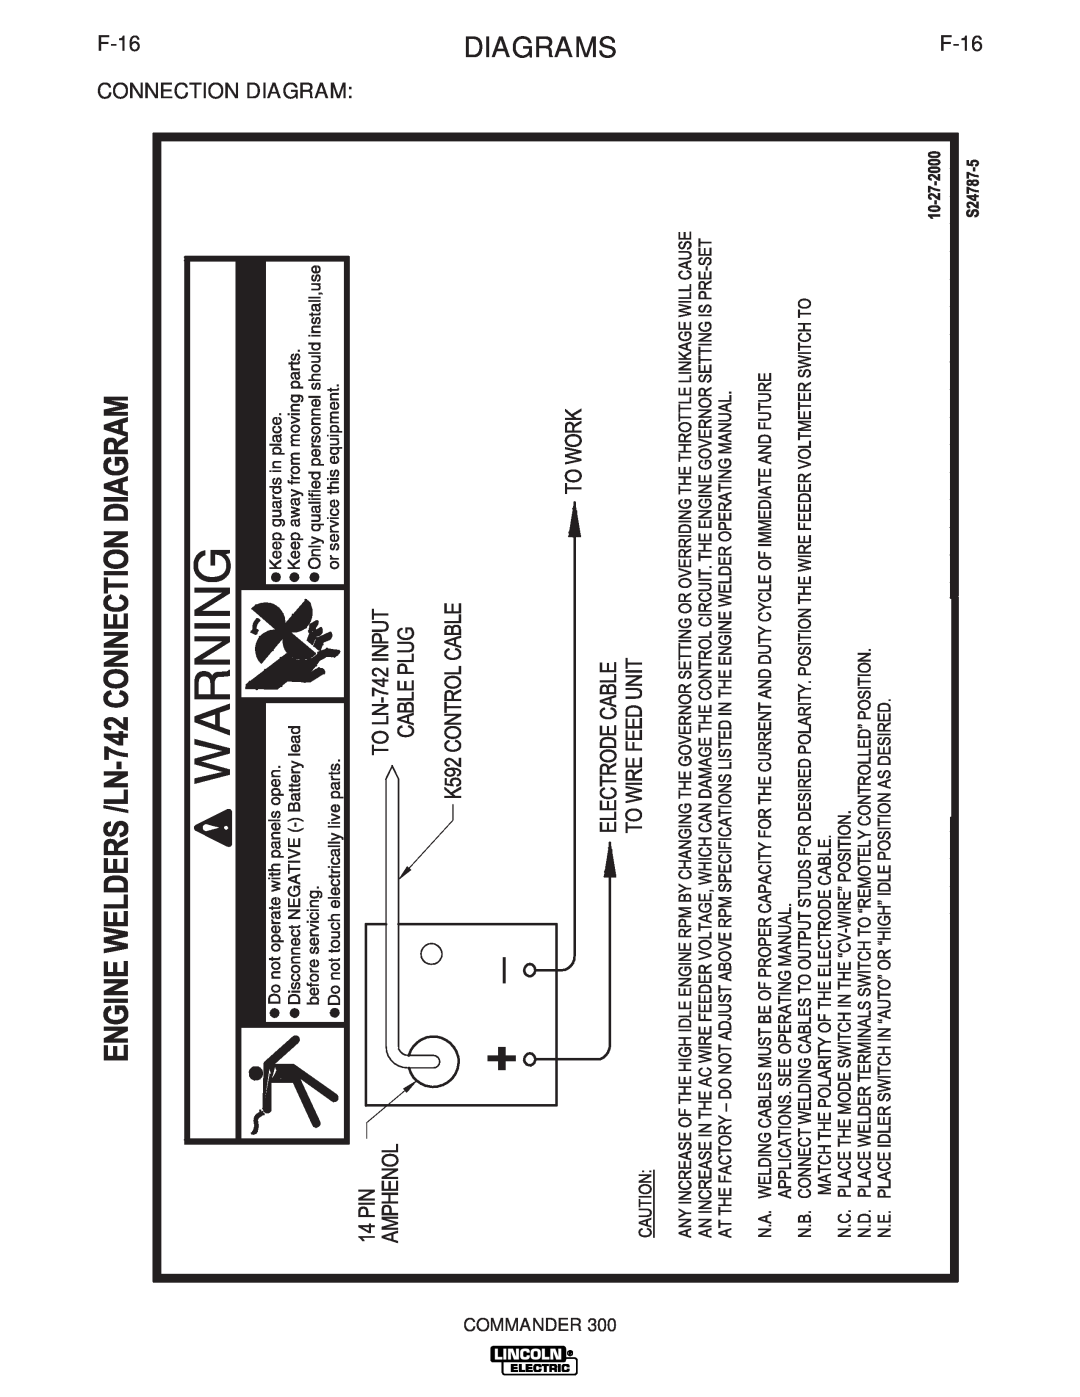 Lincoln Electric IM700-D manual DIAGRAMSF-16, F-16 CONNECTION DIAGRAM, Commander 